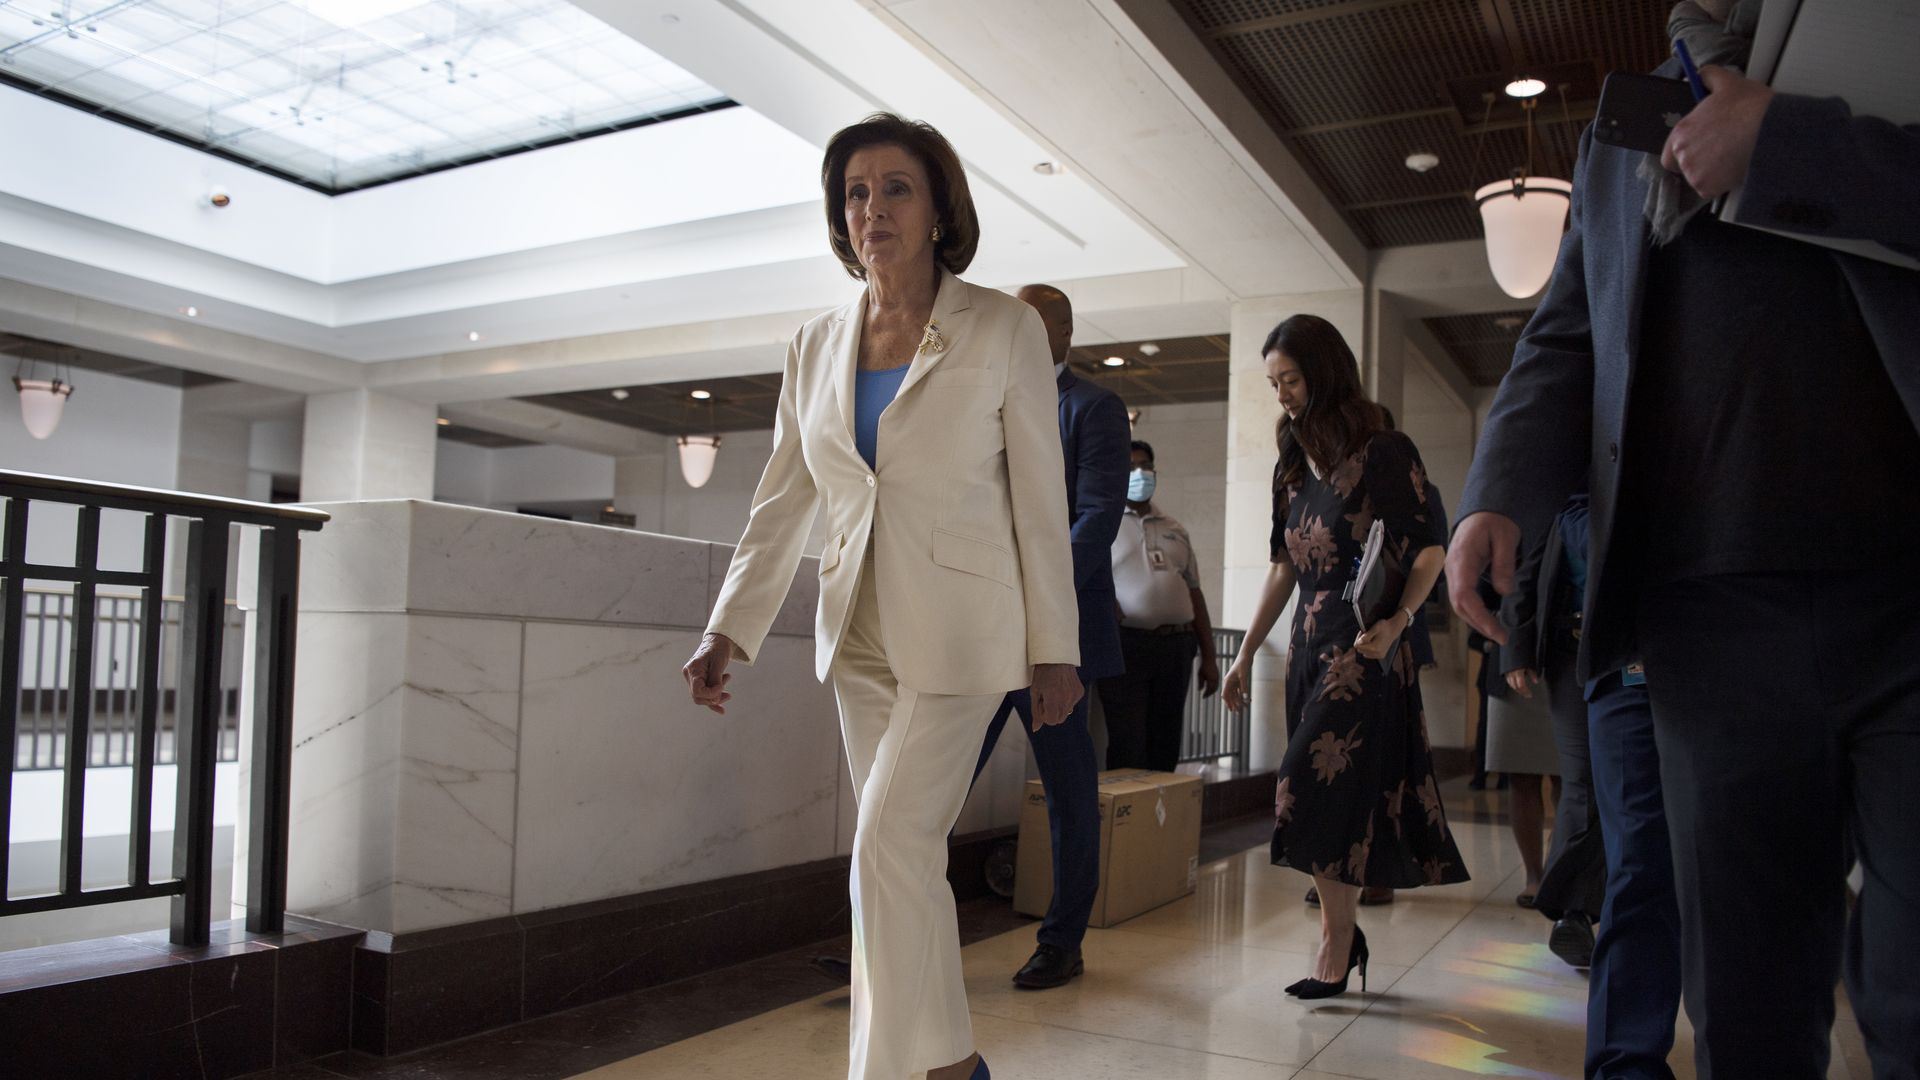 Photo of Nancy Pelosi in a white suit and blue heels walking in the Capitol hallway